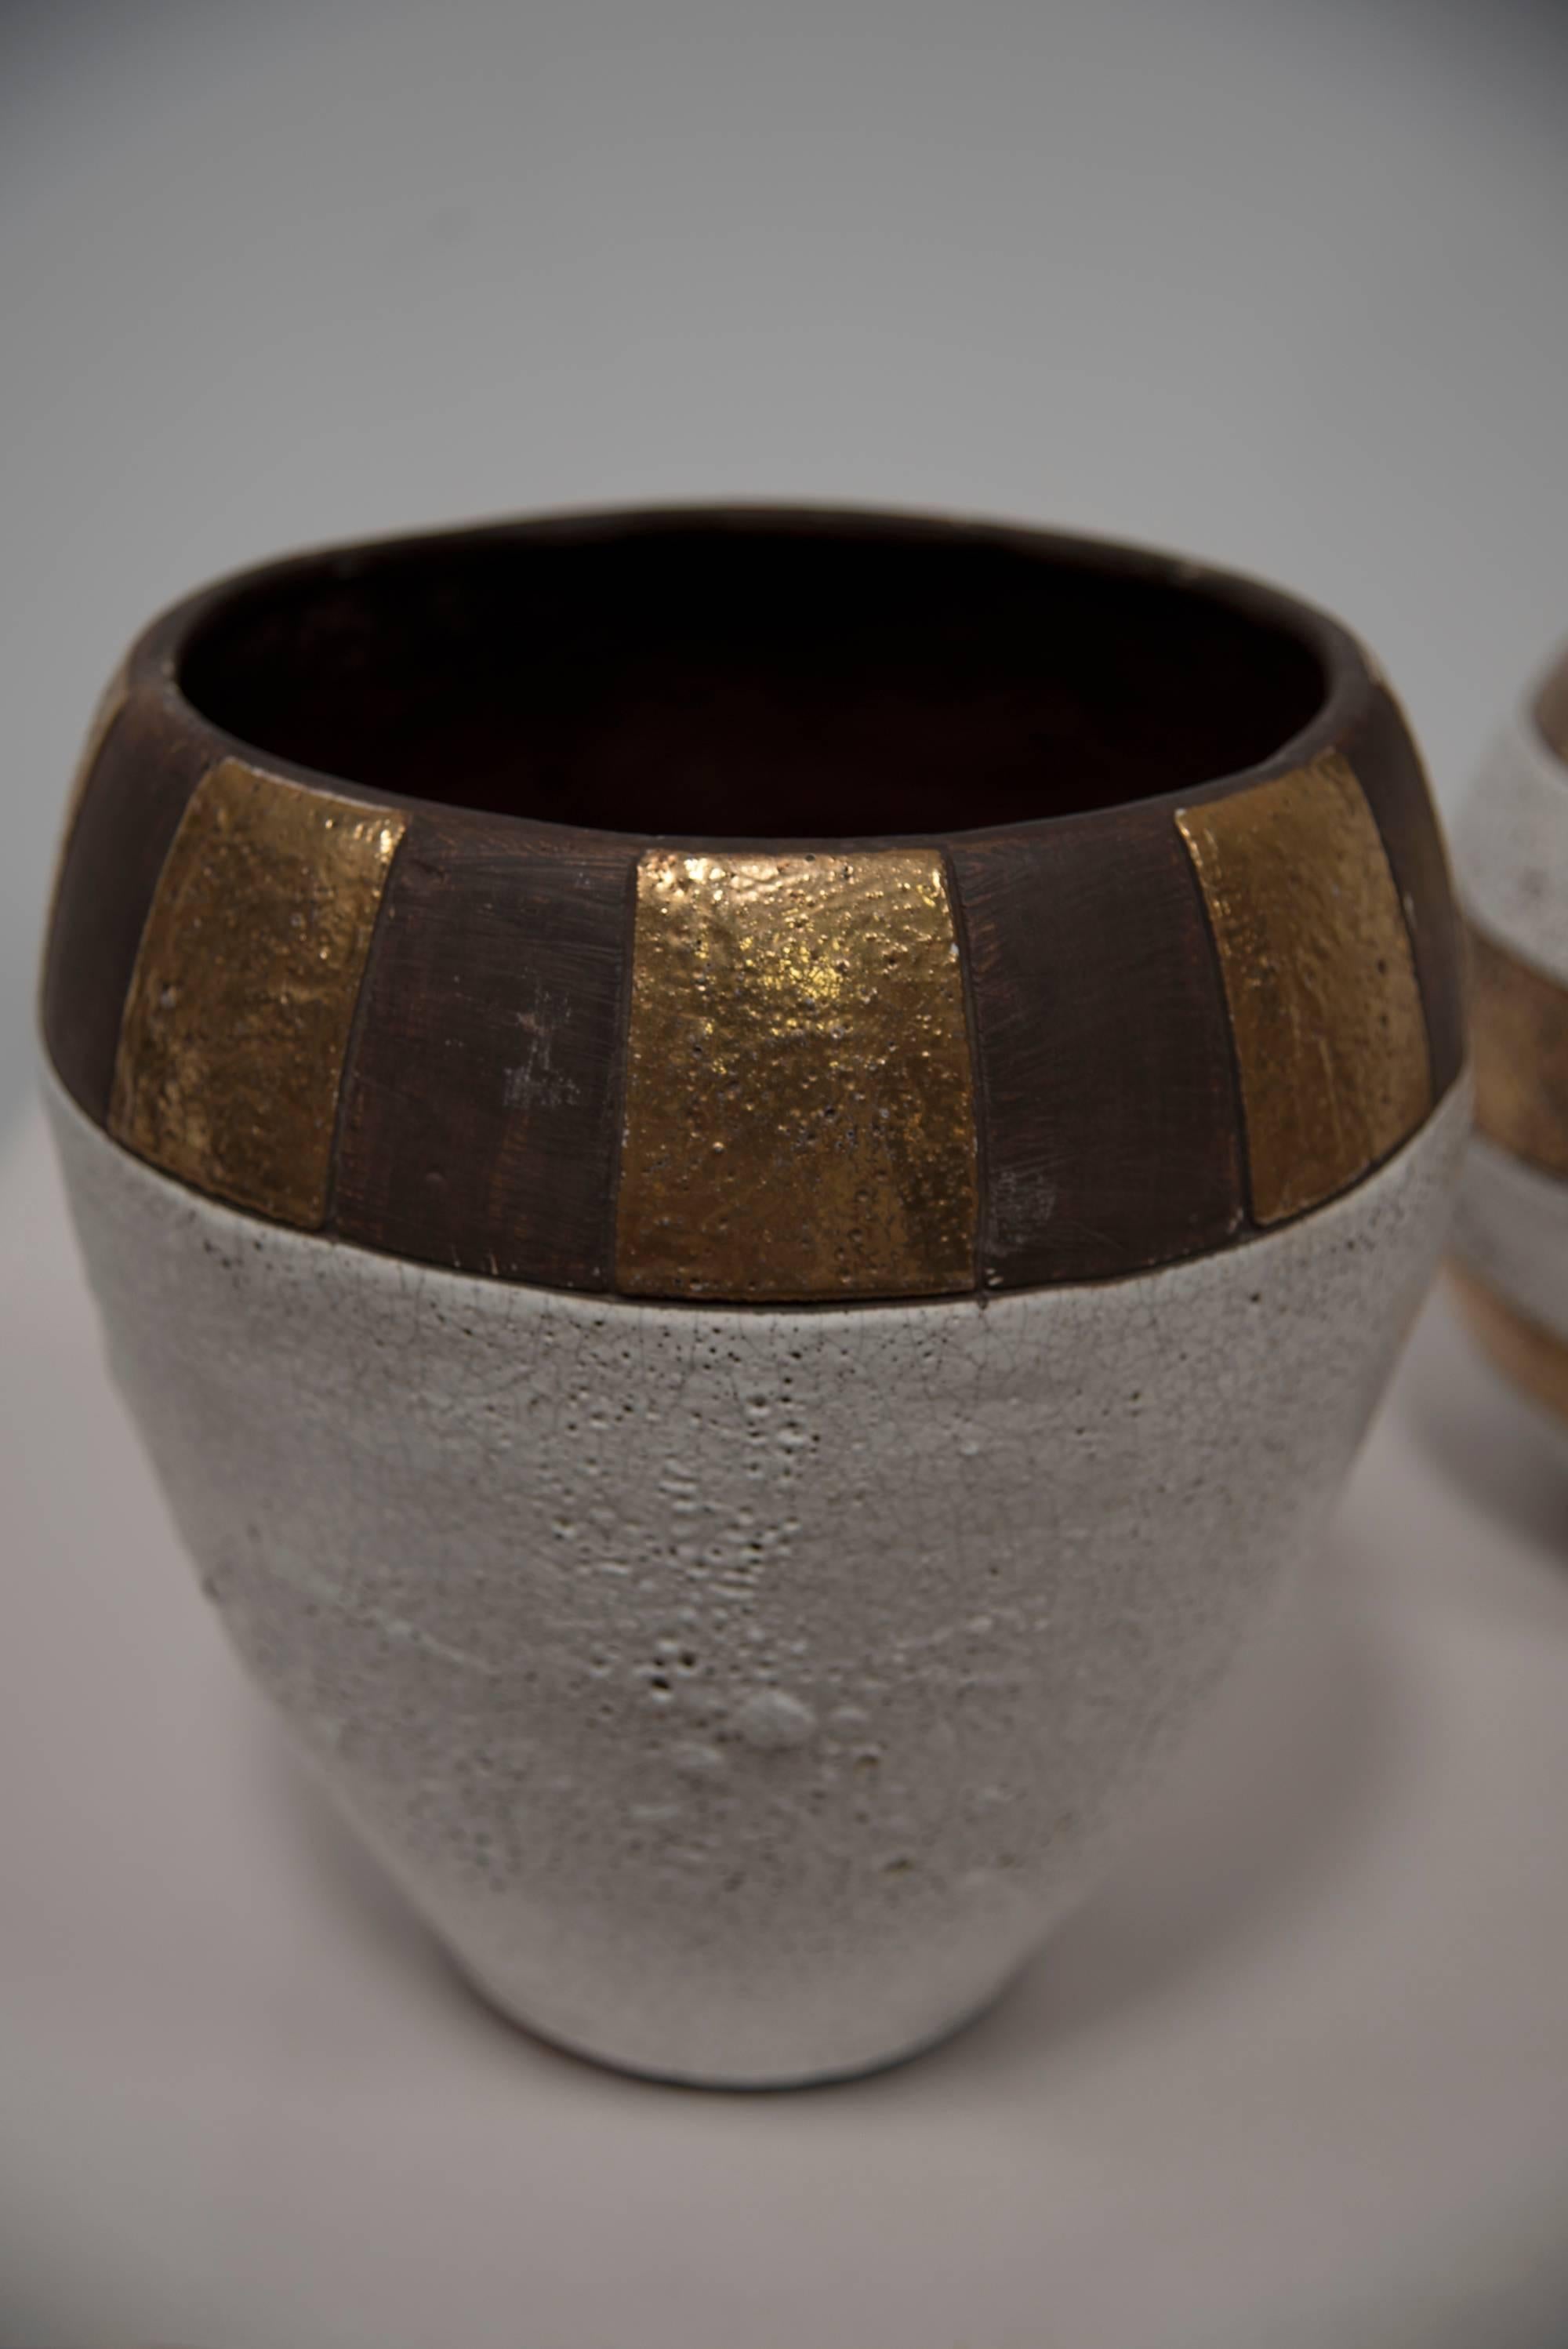 A robust set of three American beige, black striped and natural coloured glazed pottery vessels with gilt gold highlights and crackling glaze. Engraved as JARU designs. Jaru Pottery was founded in 1958 but is no longer available on the marketplace.